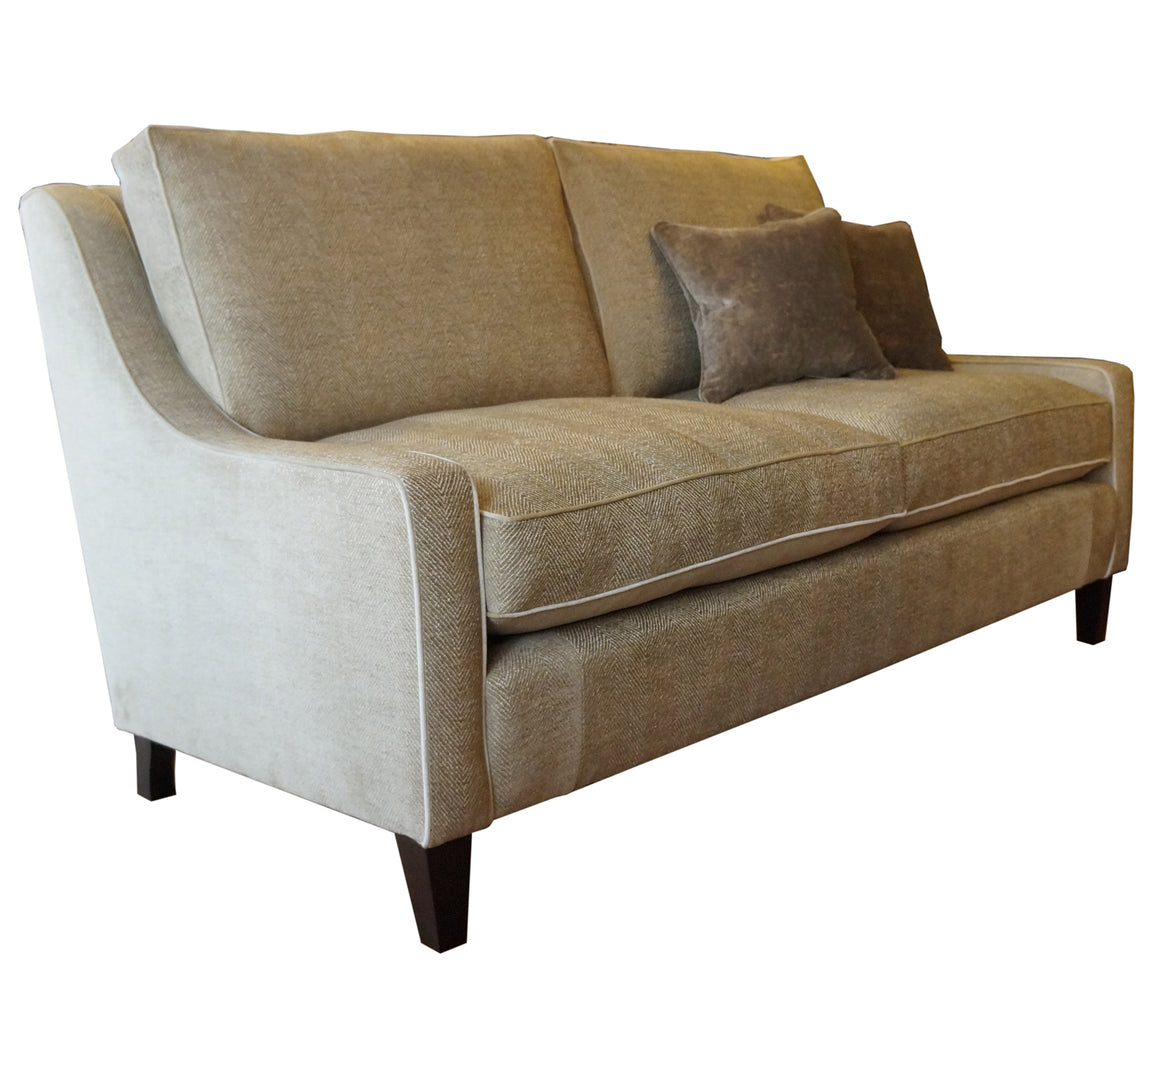 Marlow sofas and chairs in GP&J Baker Fairford HALF PRICE TO ORDER